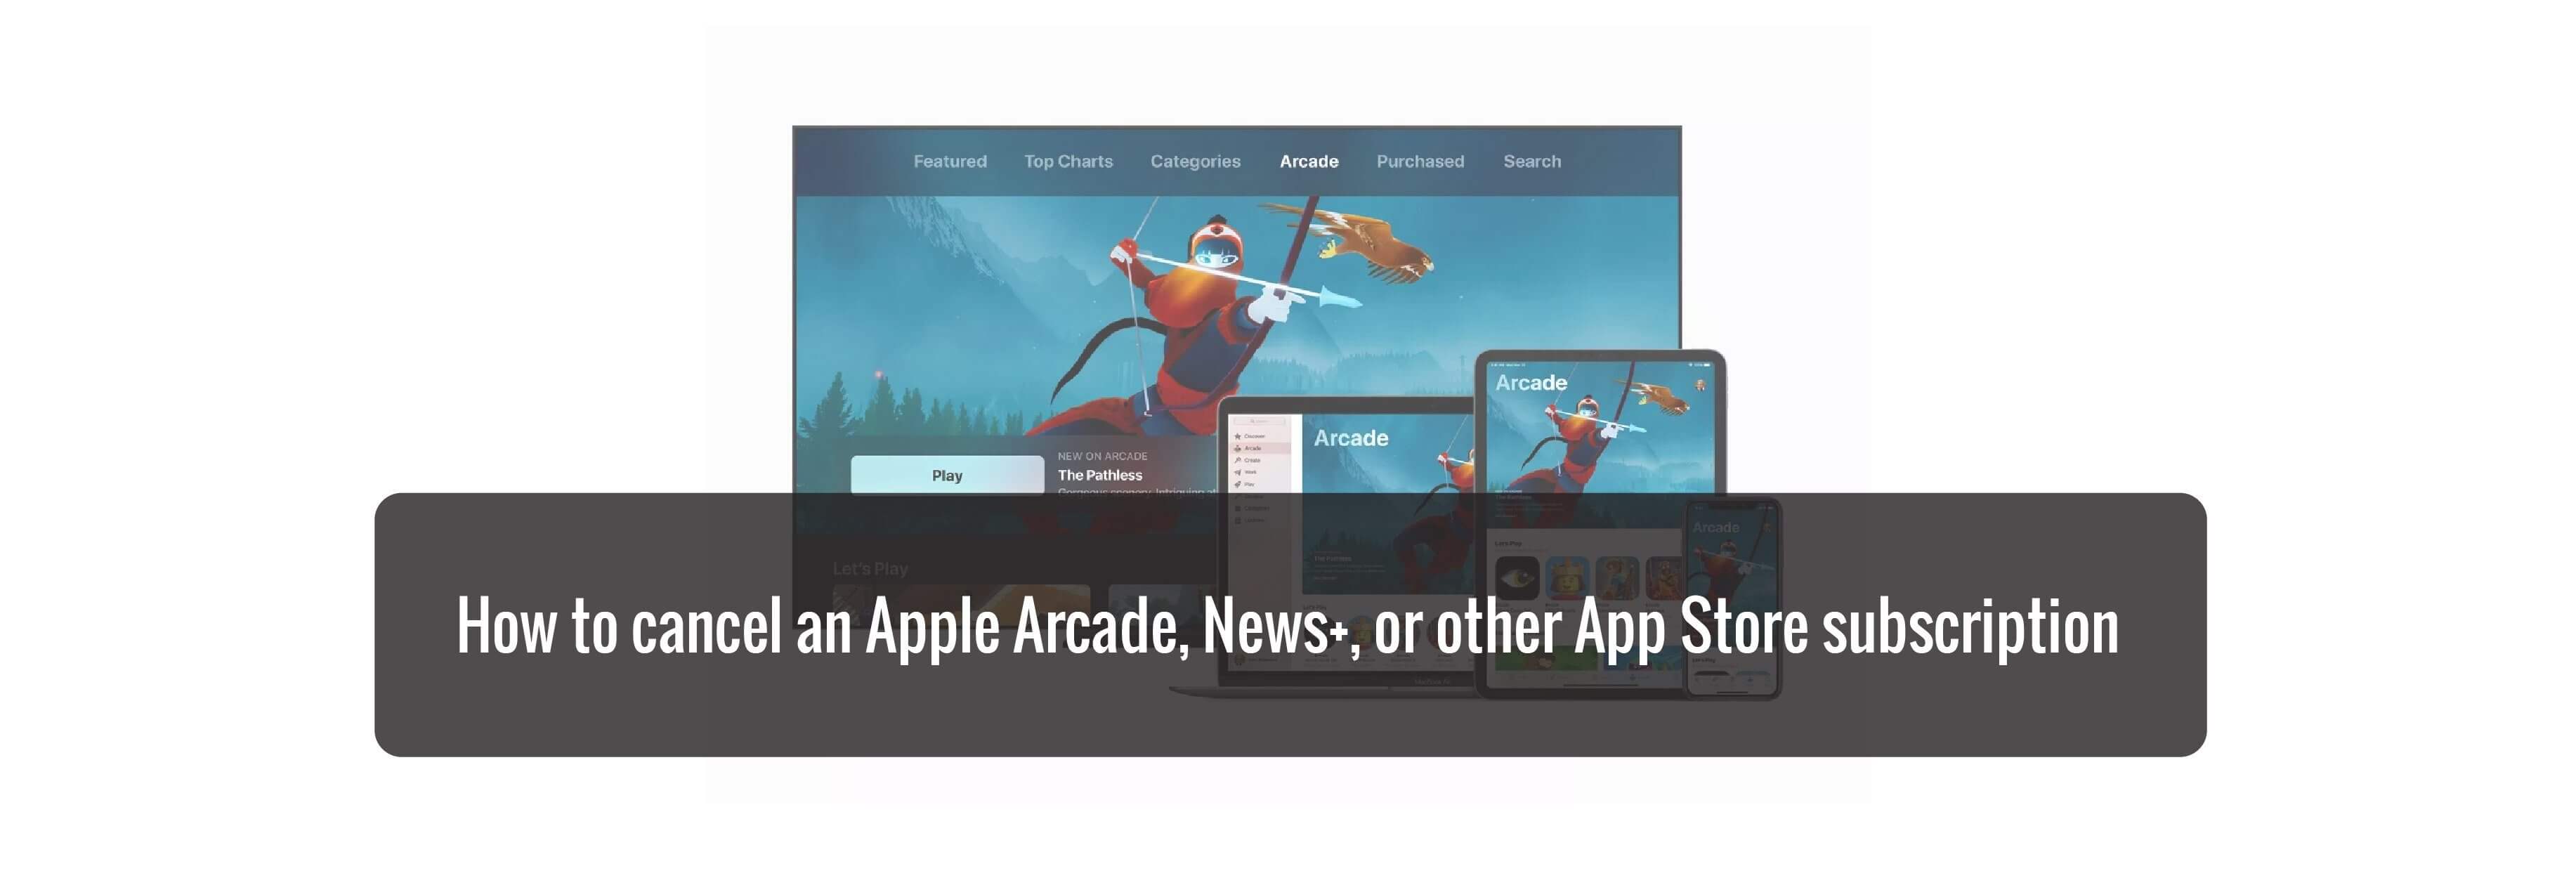 How to cancel an Apple Arcade, News+, or other App Store subscription